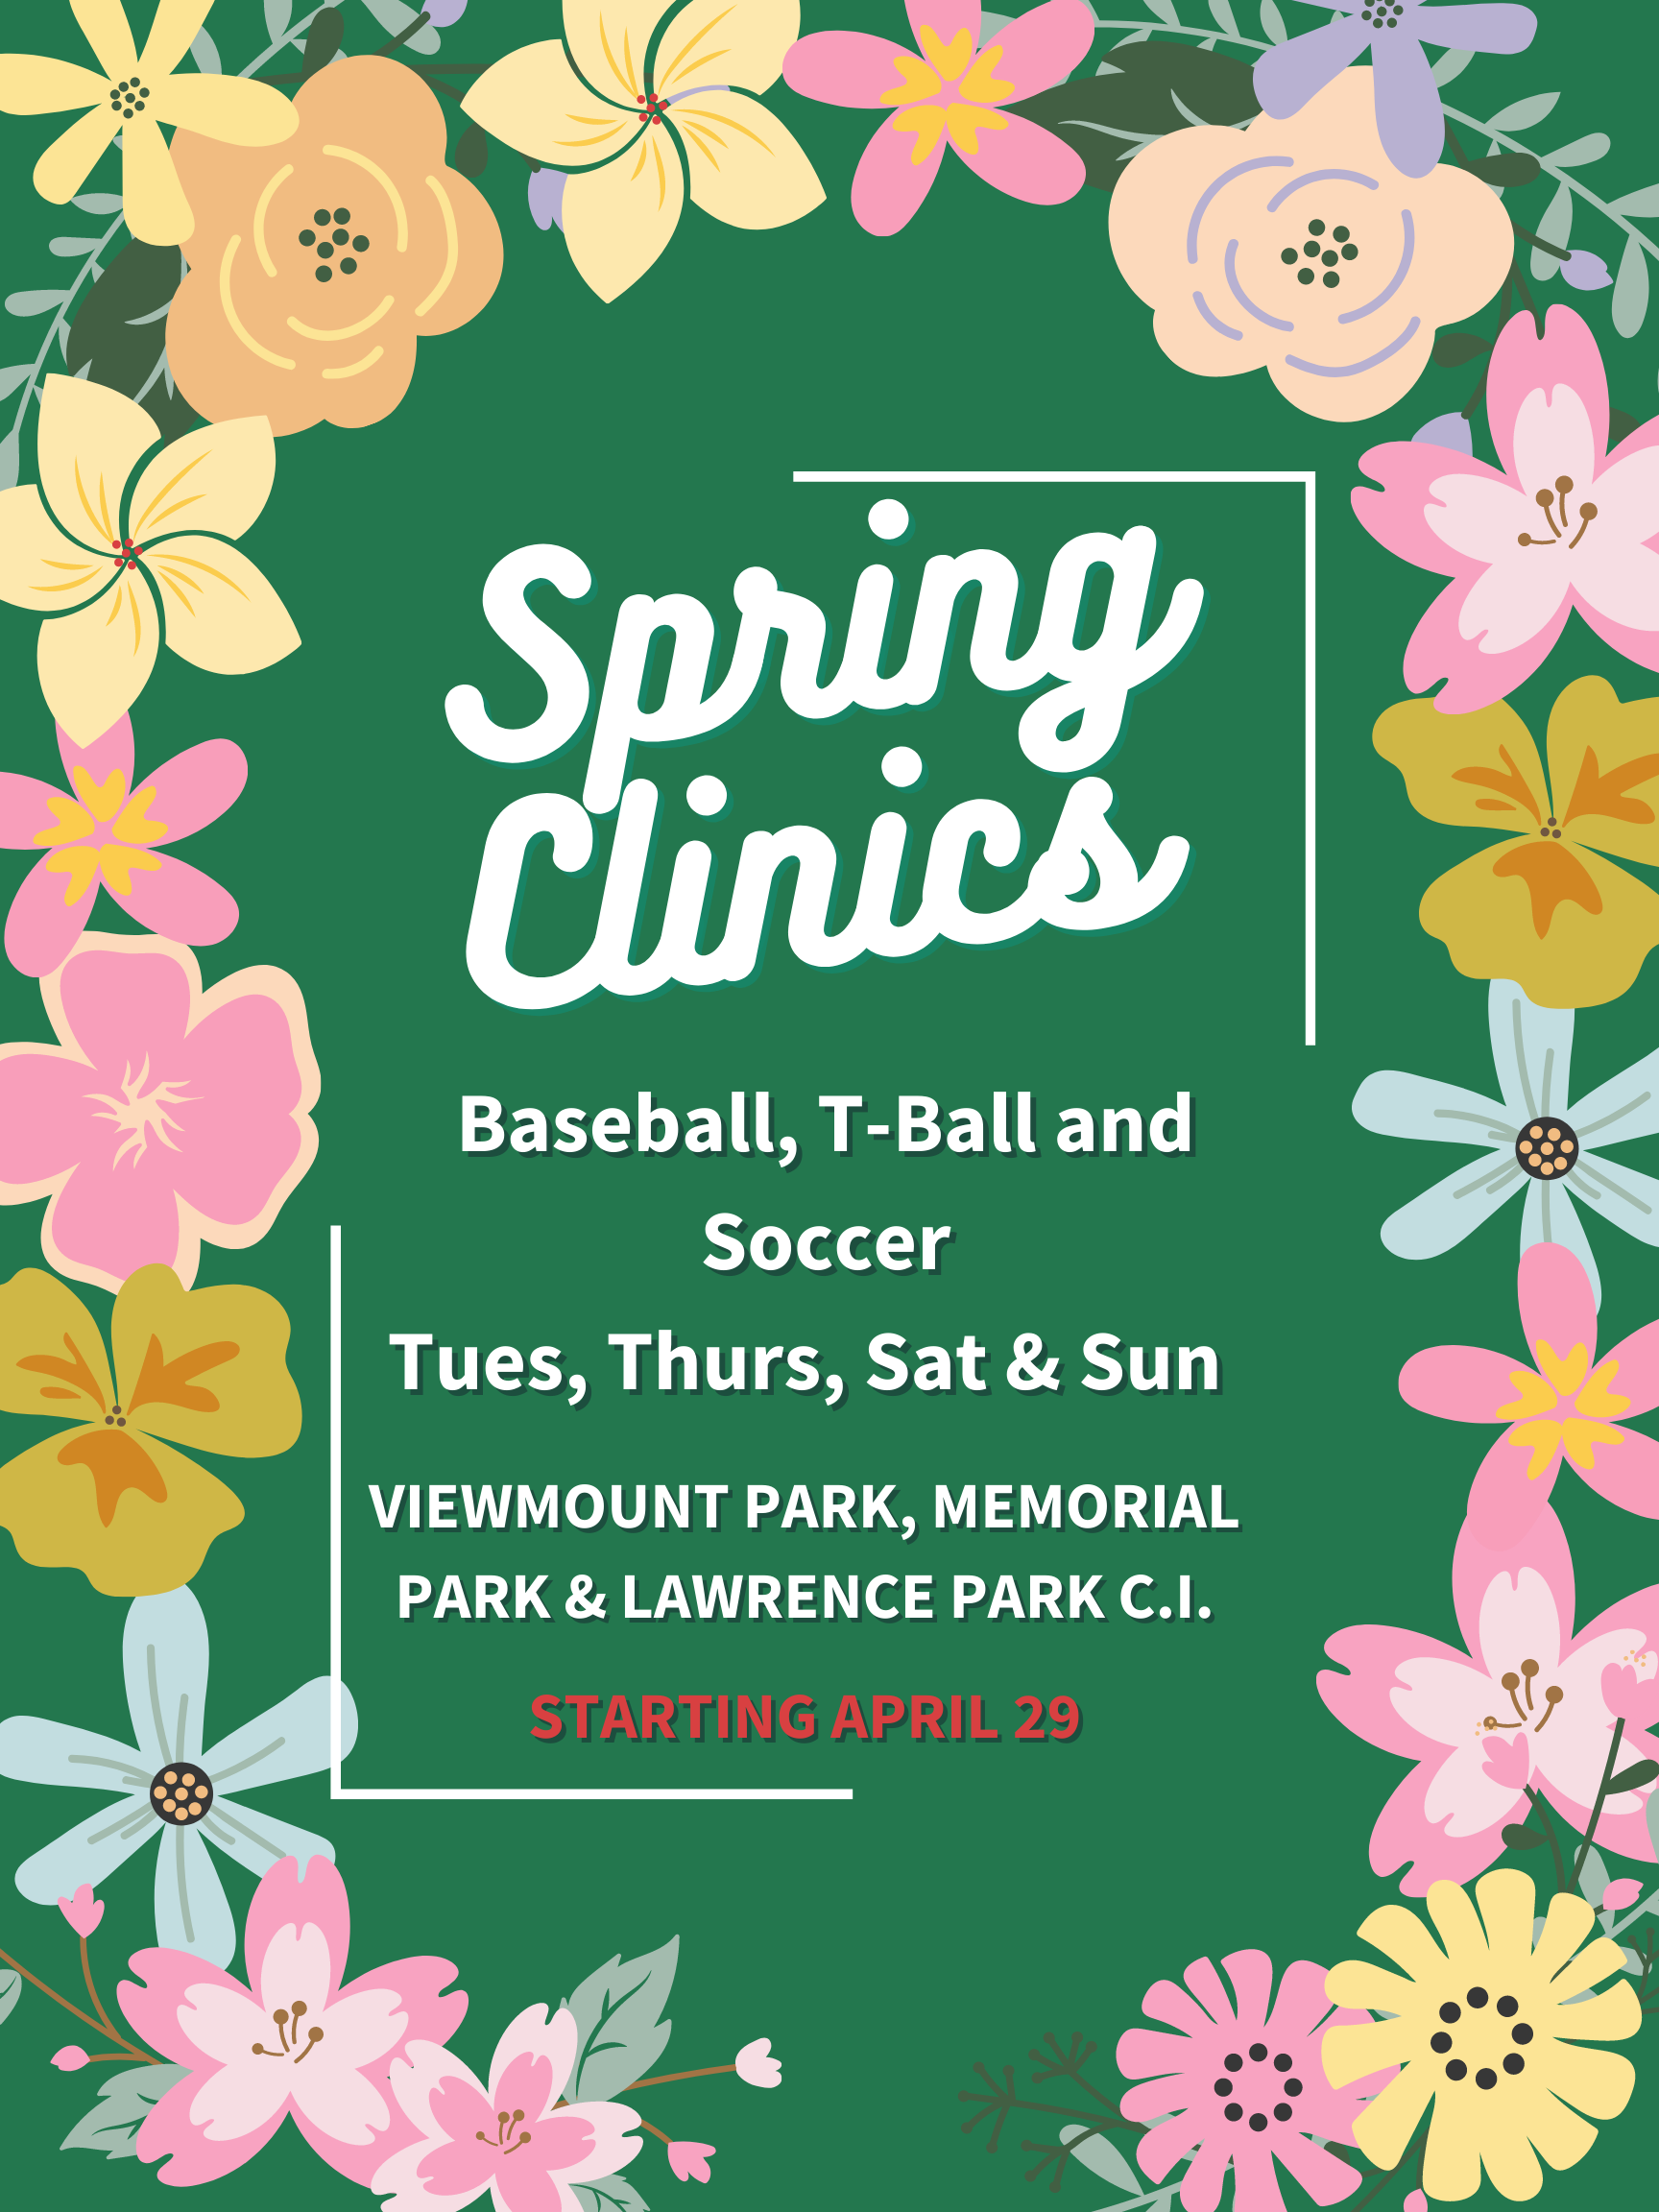 Spring Clinics flyer email